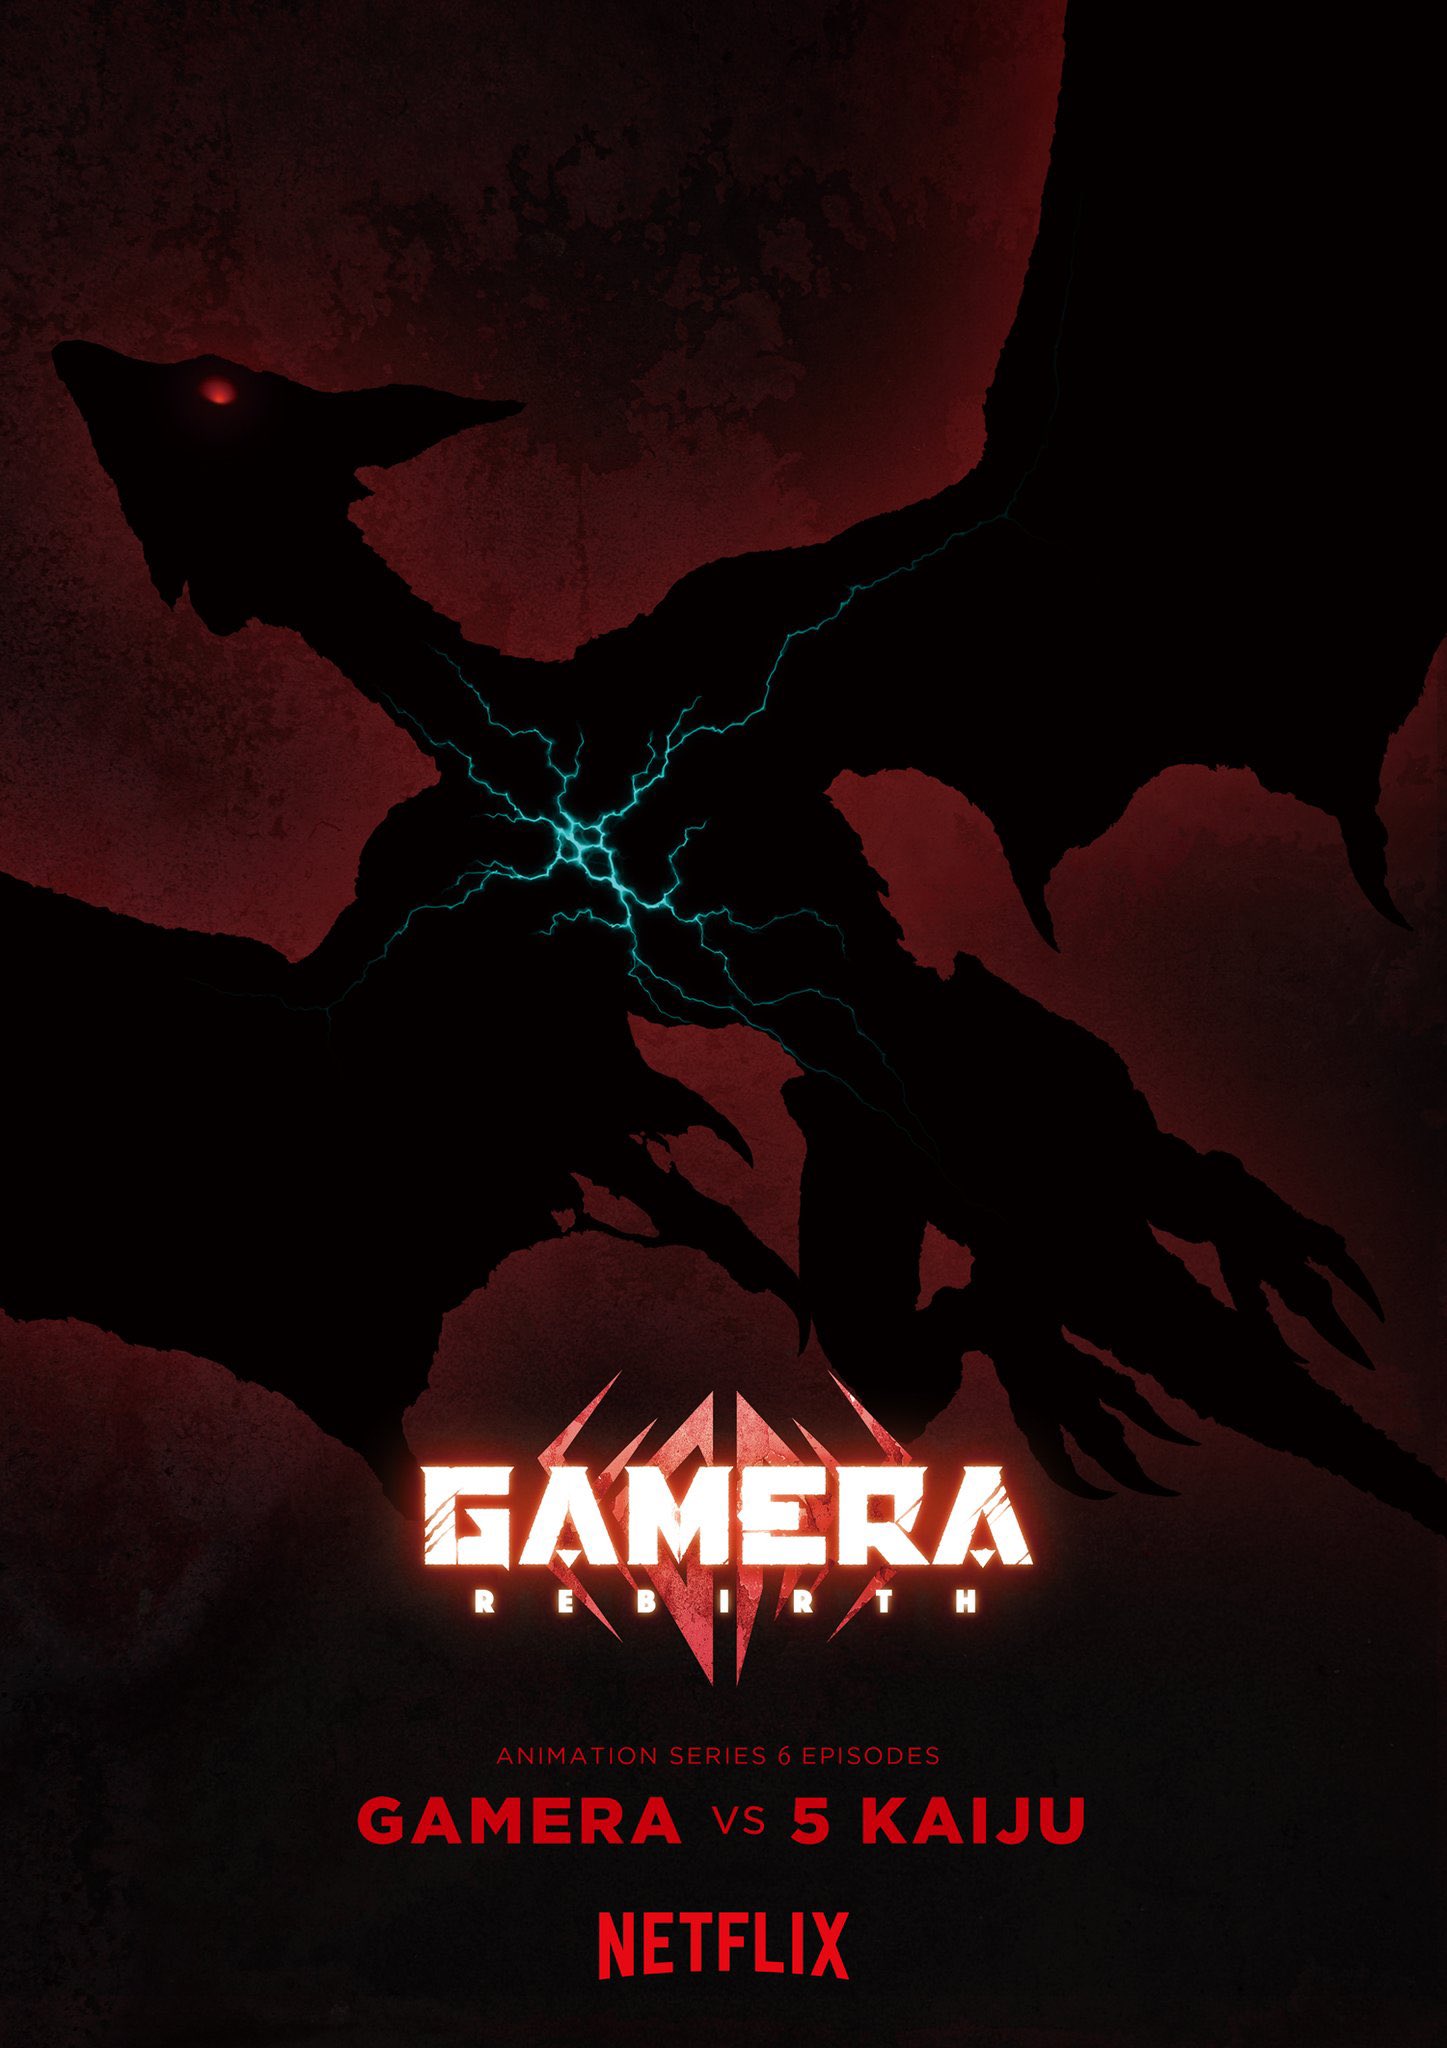 GAMERA -Rebirth- summary and ending explained